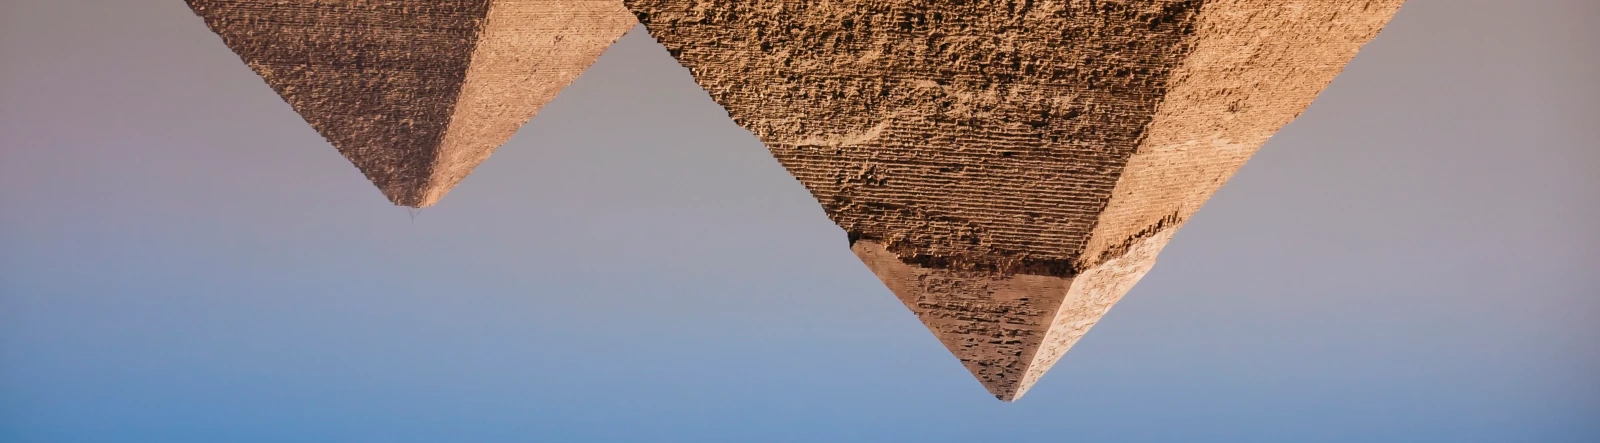 Two pyramids inverted with blue sky in the background